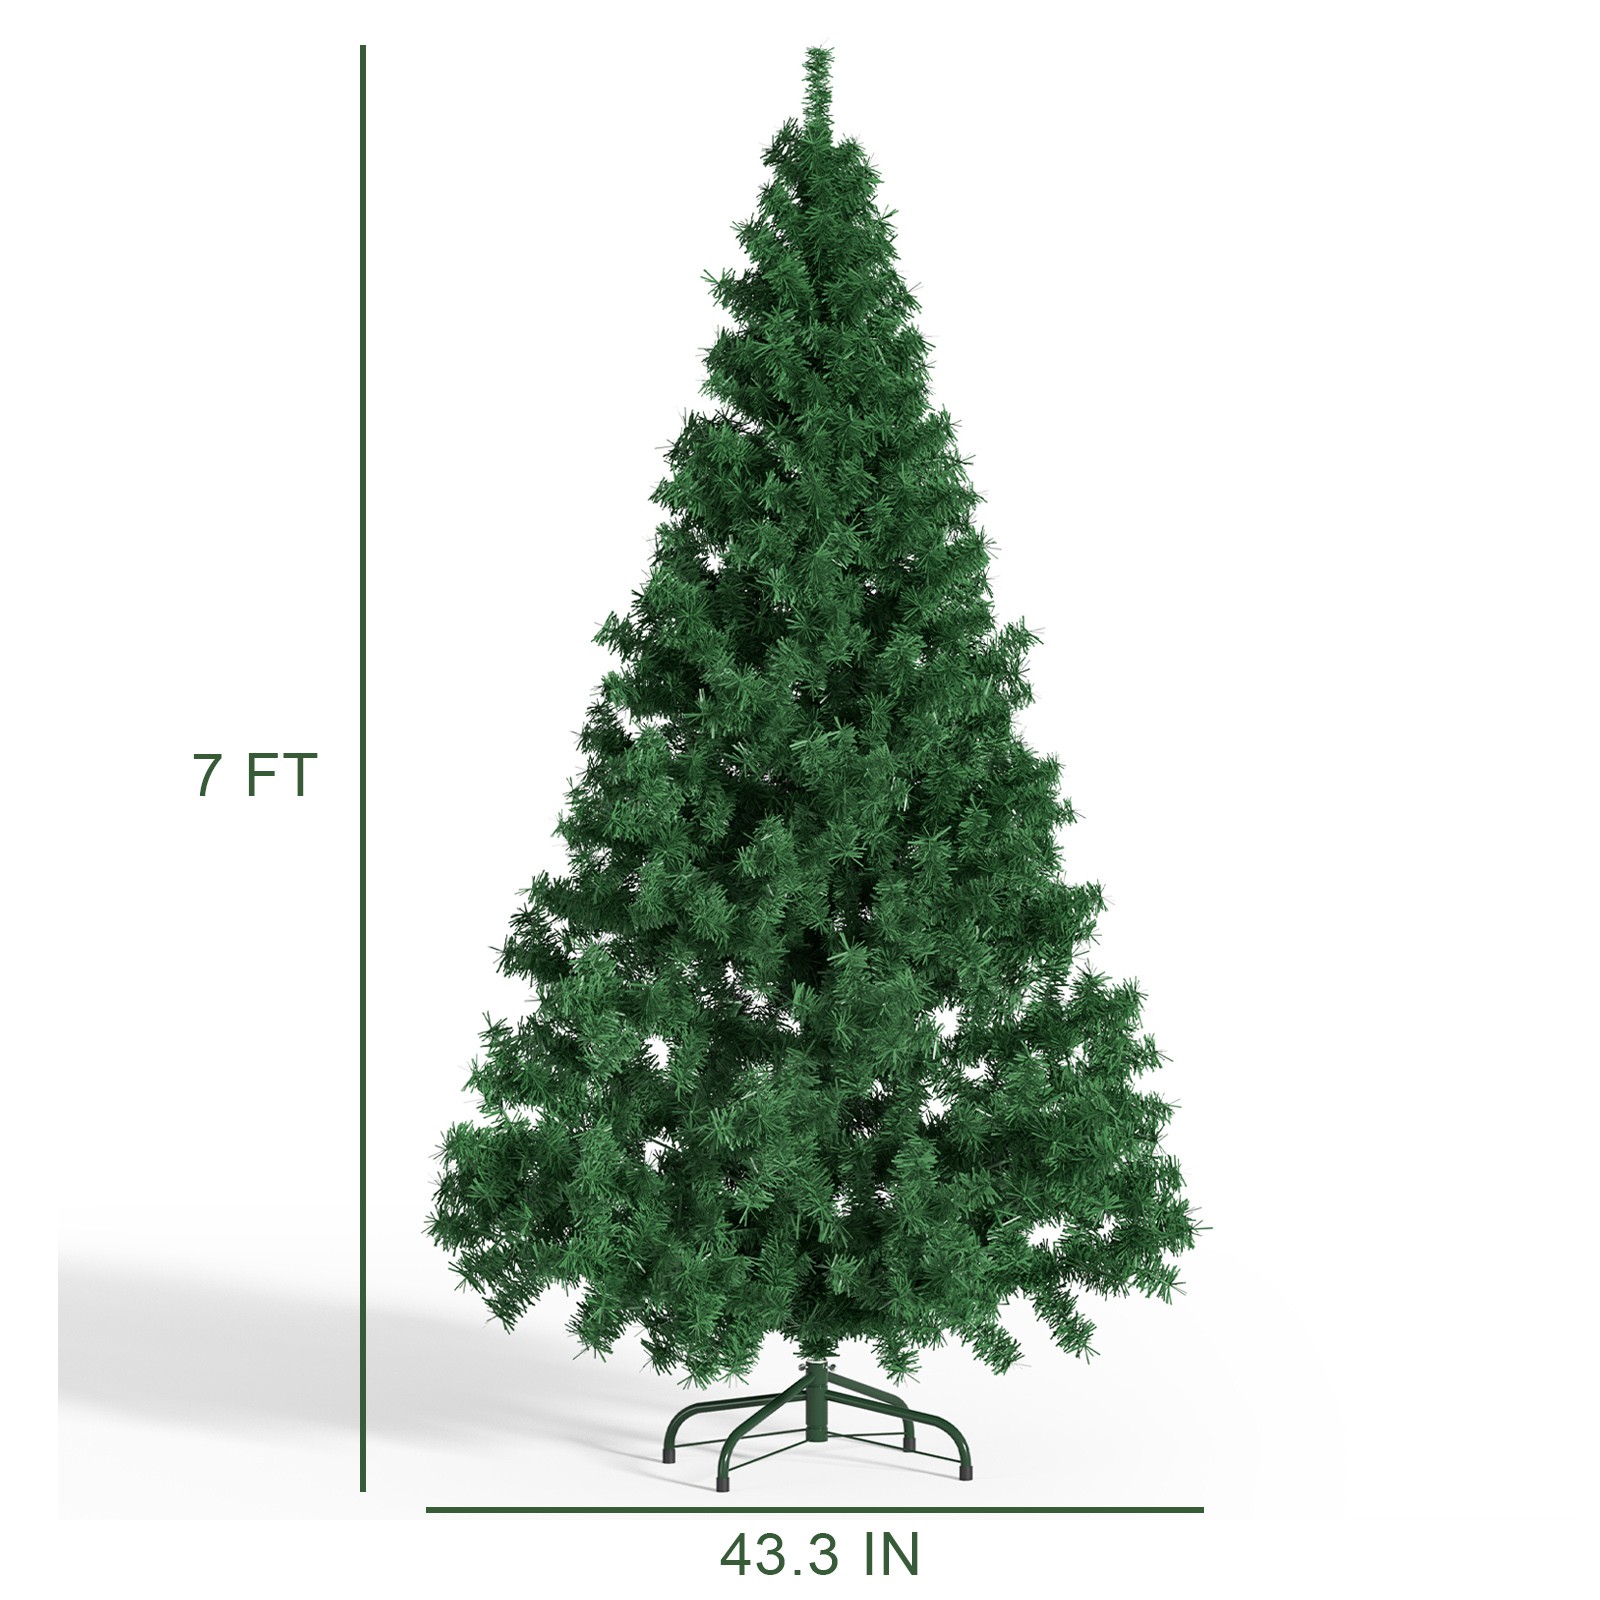 BEWAVE Artificial Christmas Tree with Light, Premium Unlit Spruce Full Xmas Tree Decor for Home Office Indoor Decoration, 7 Ft